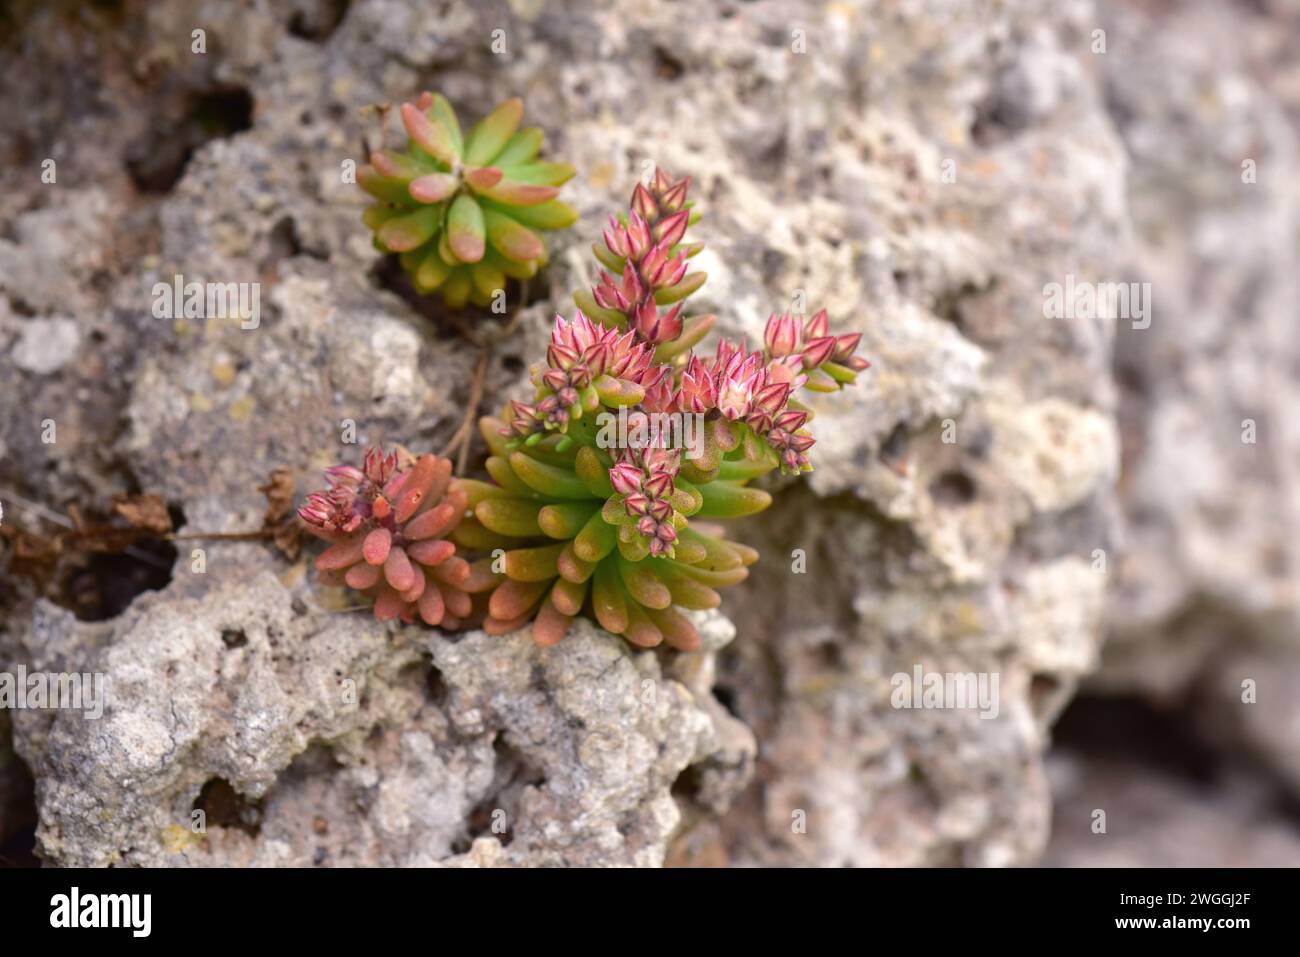 Red stonecrop (Sedum rubens) is an annual plant native to Mediterranean Basin and Portugal. This photo was taken in Trepuco, Menorca, Balearic Islands Stock Photo